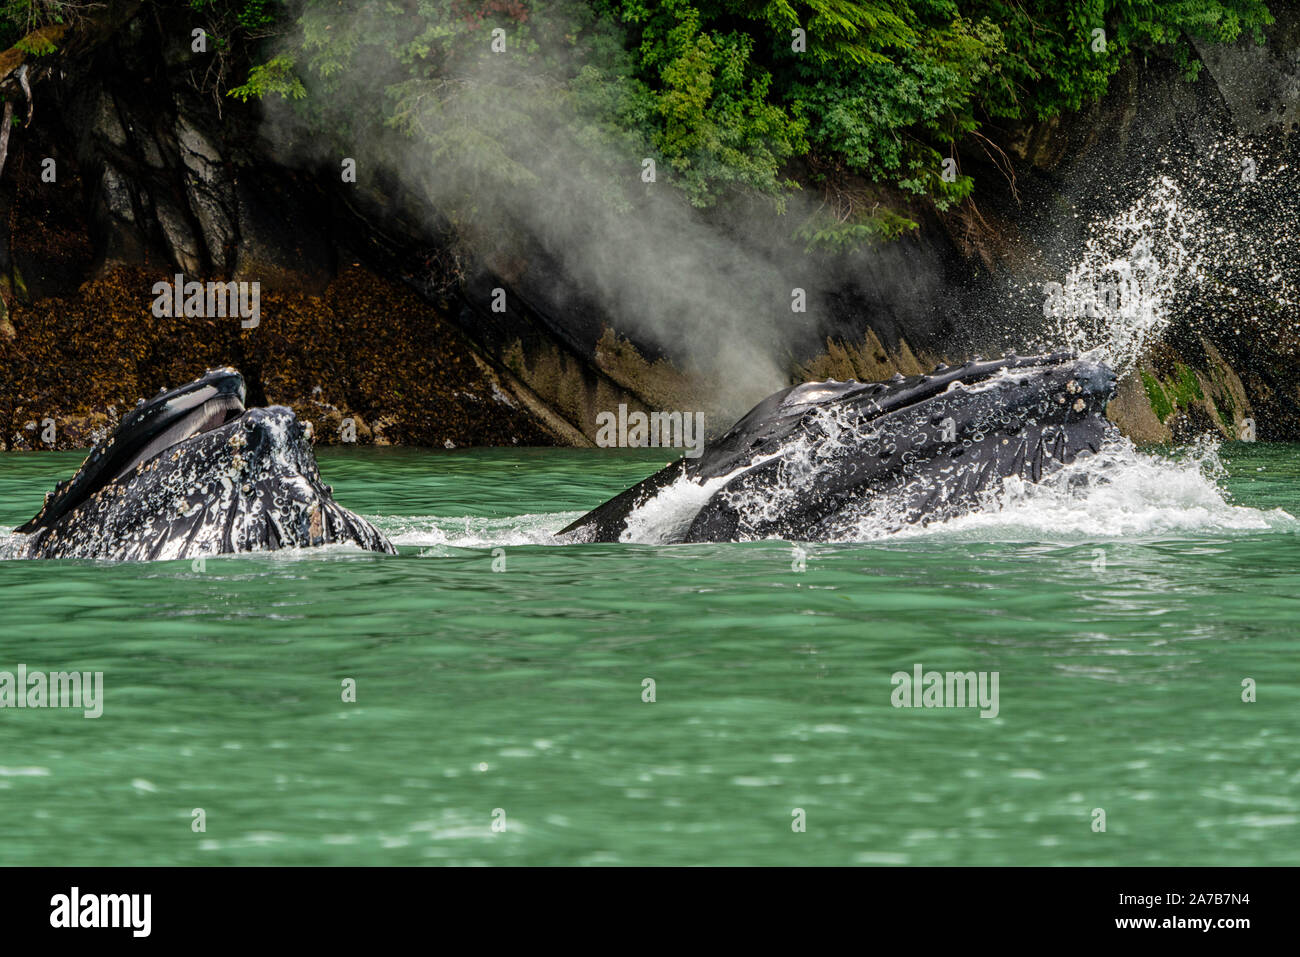 Two humpback whale lunge feeding in the green glacier feed water of Knight Inlet, First Nations Territory, Great Bear Rainforest, British Columbia, Ca Stock Photo